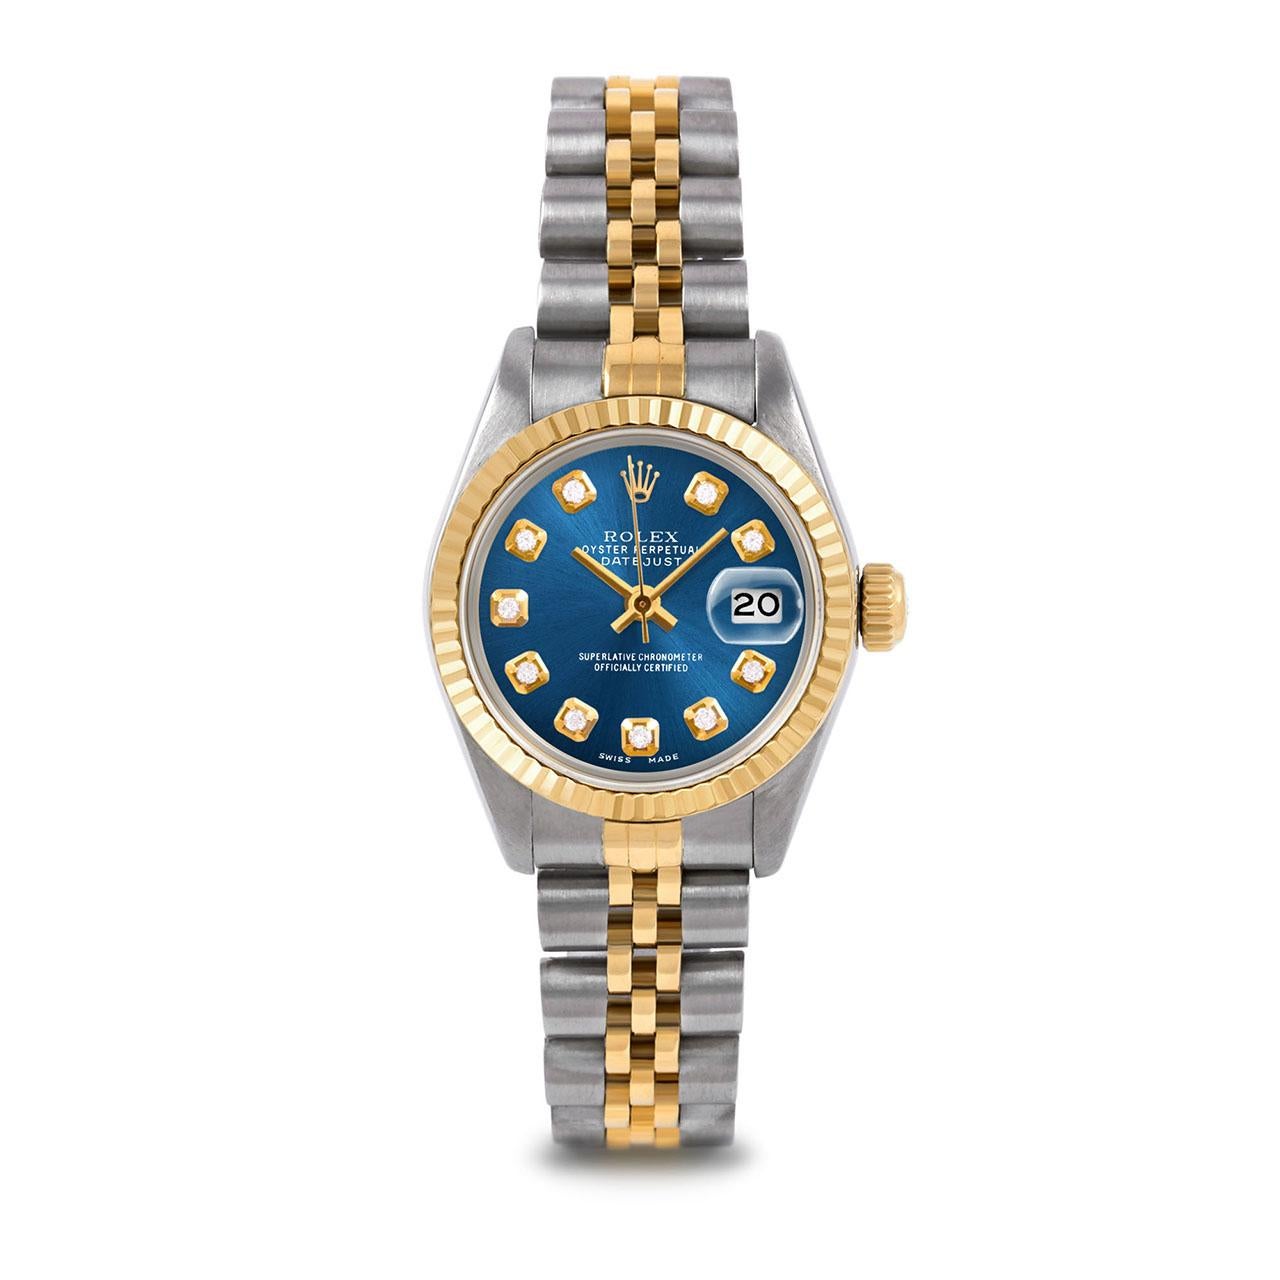 Pre-Owned Rolex 6917 Ladies 26mm Two Tone Datejust Watch, Custom Blue Diamond Dial & Fluted Bezel on Rolex 14K Yellow Gold And Stainless Steel Jubilee Band.   

SKU 6917-TT-BLU-DIA-AM-FLT-JBL


Brand/Model:        Rolex Datejust
Model Number:       